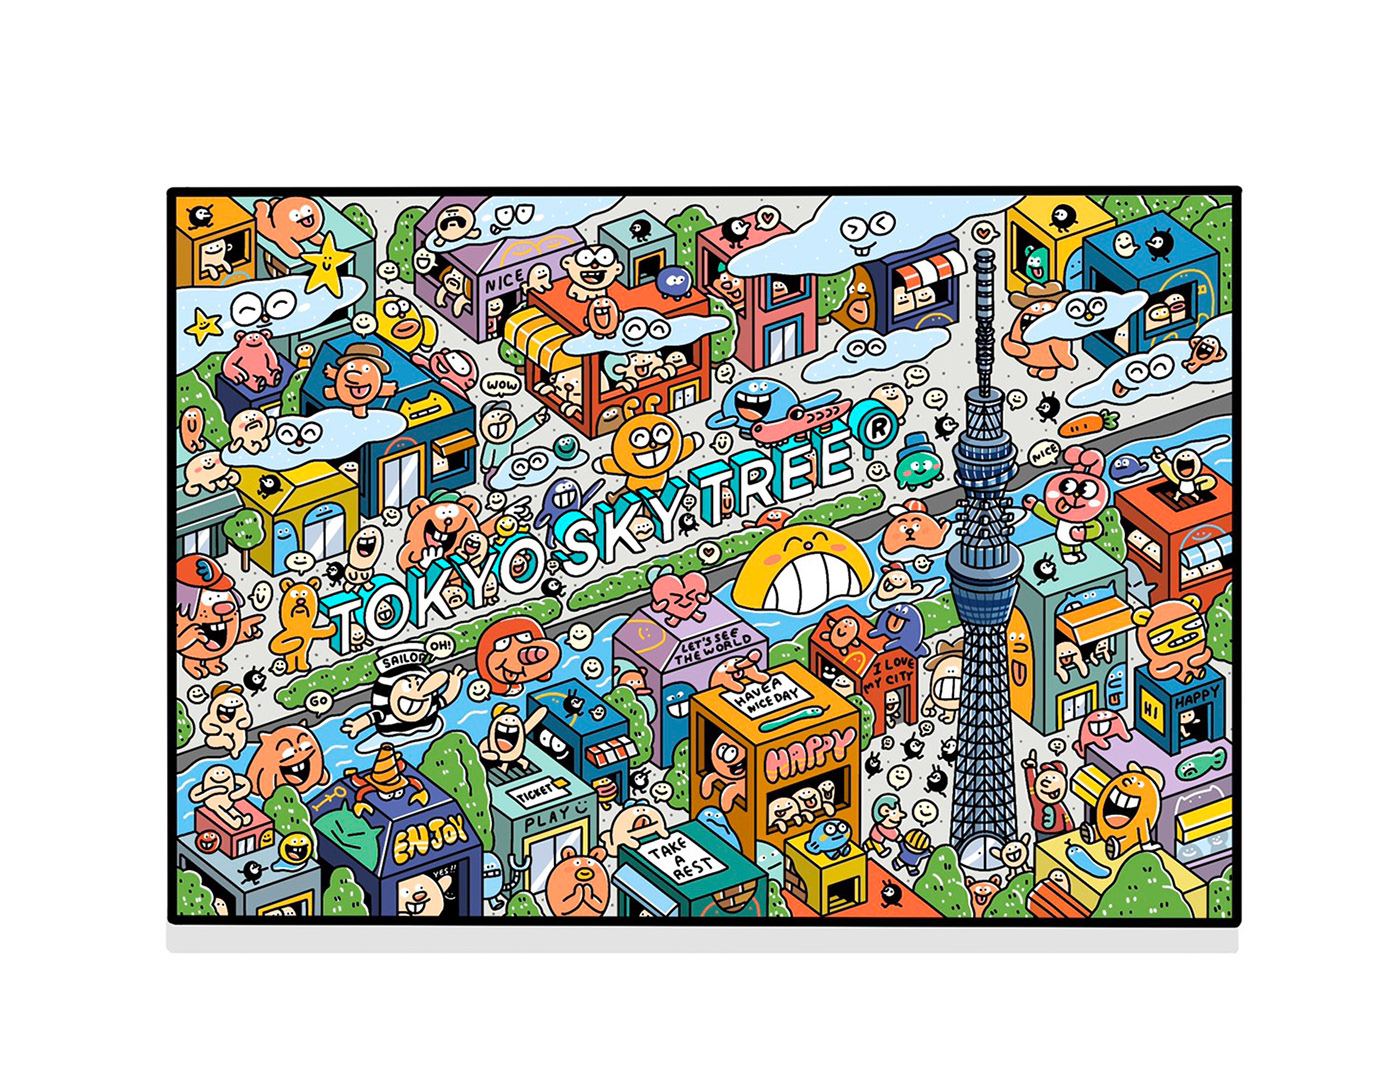 Skytree tokyo art 3Land Fun characters map town ILLUSTRATION  city